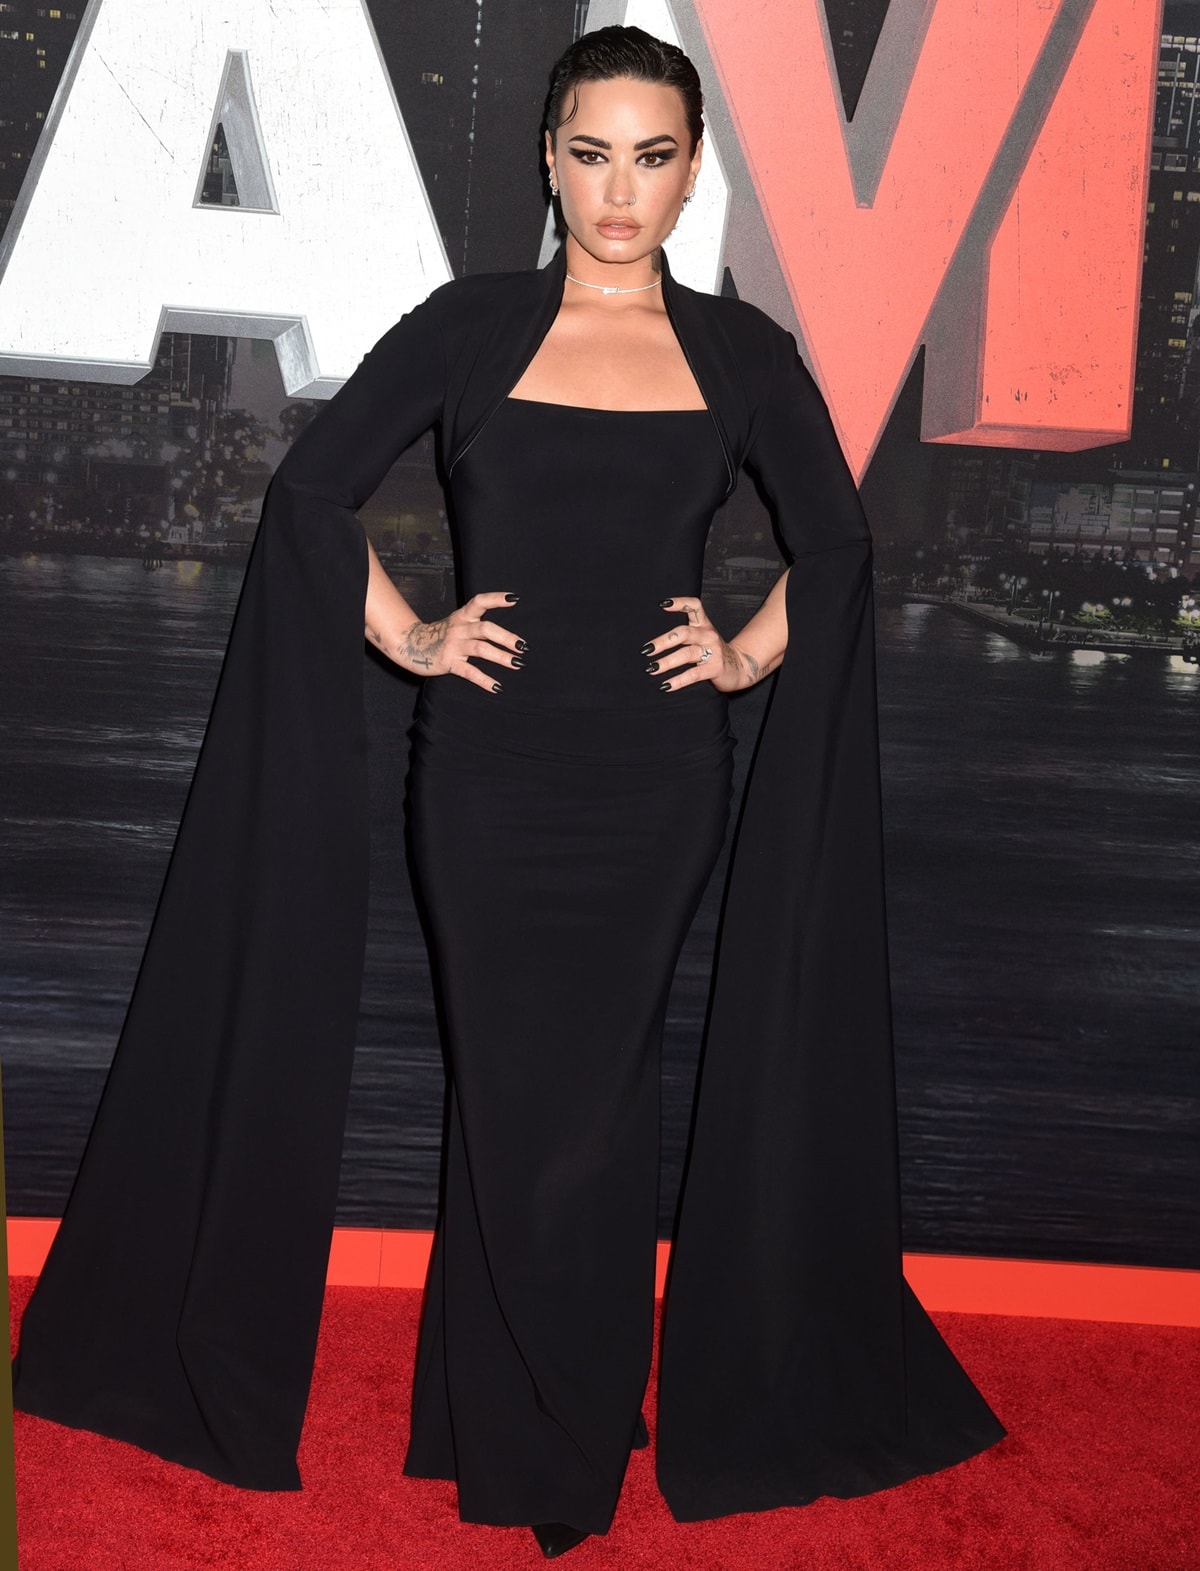 Demi Lovato showcased a stunning Gothic ensemble in a captivating gown crafted by the renowned designer Chiara Boni La Petite Robe featuring a mandarin collar, a figure-hugging mermaid-style silhouette, and exquisite long cape shawl sleeves